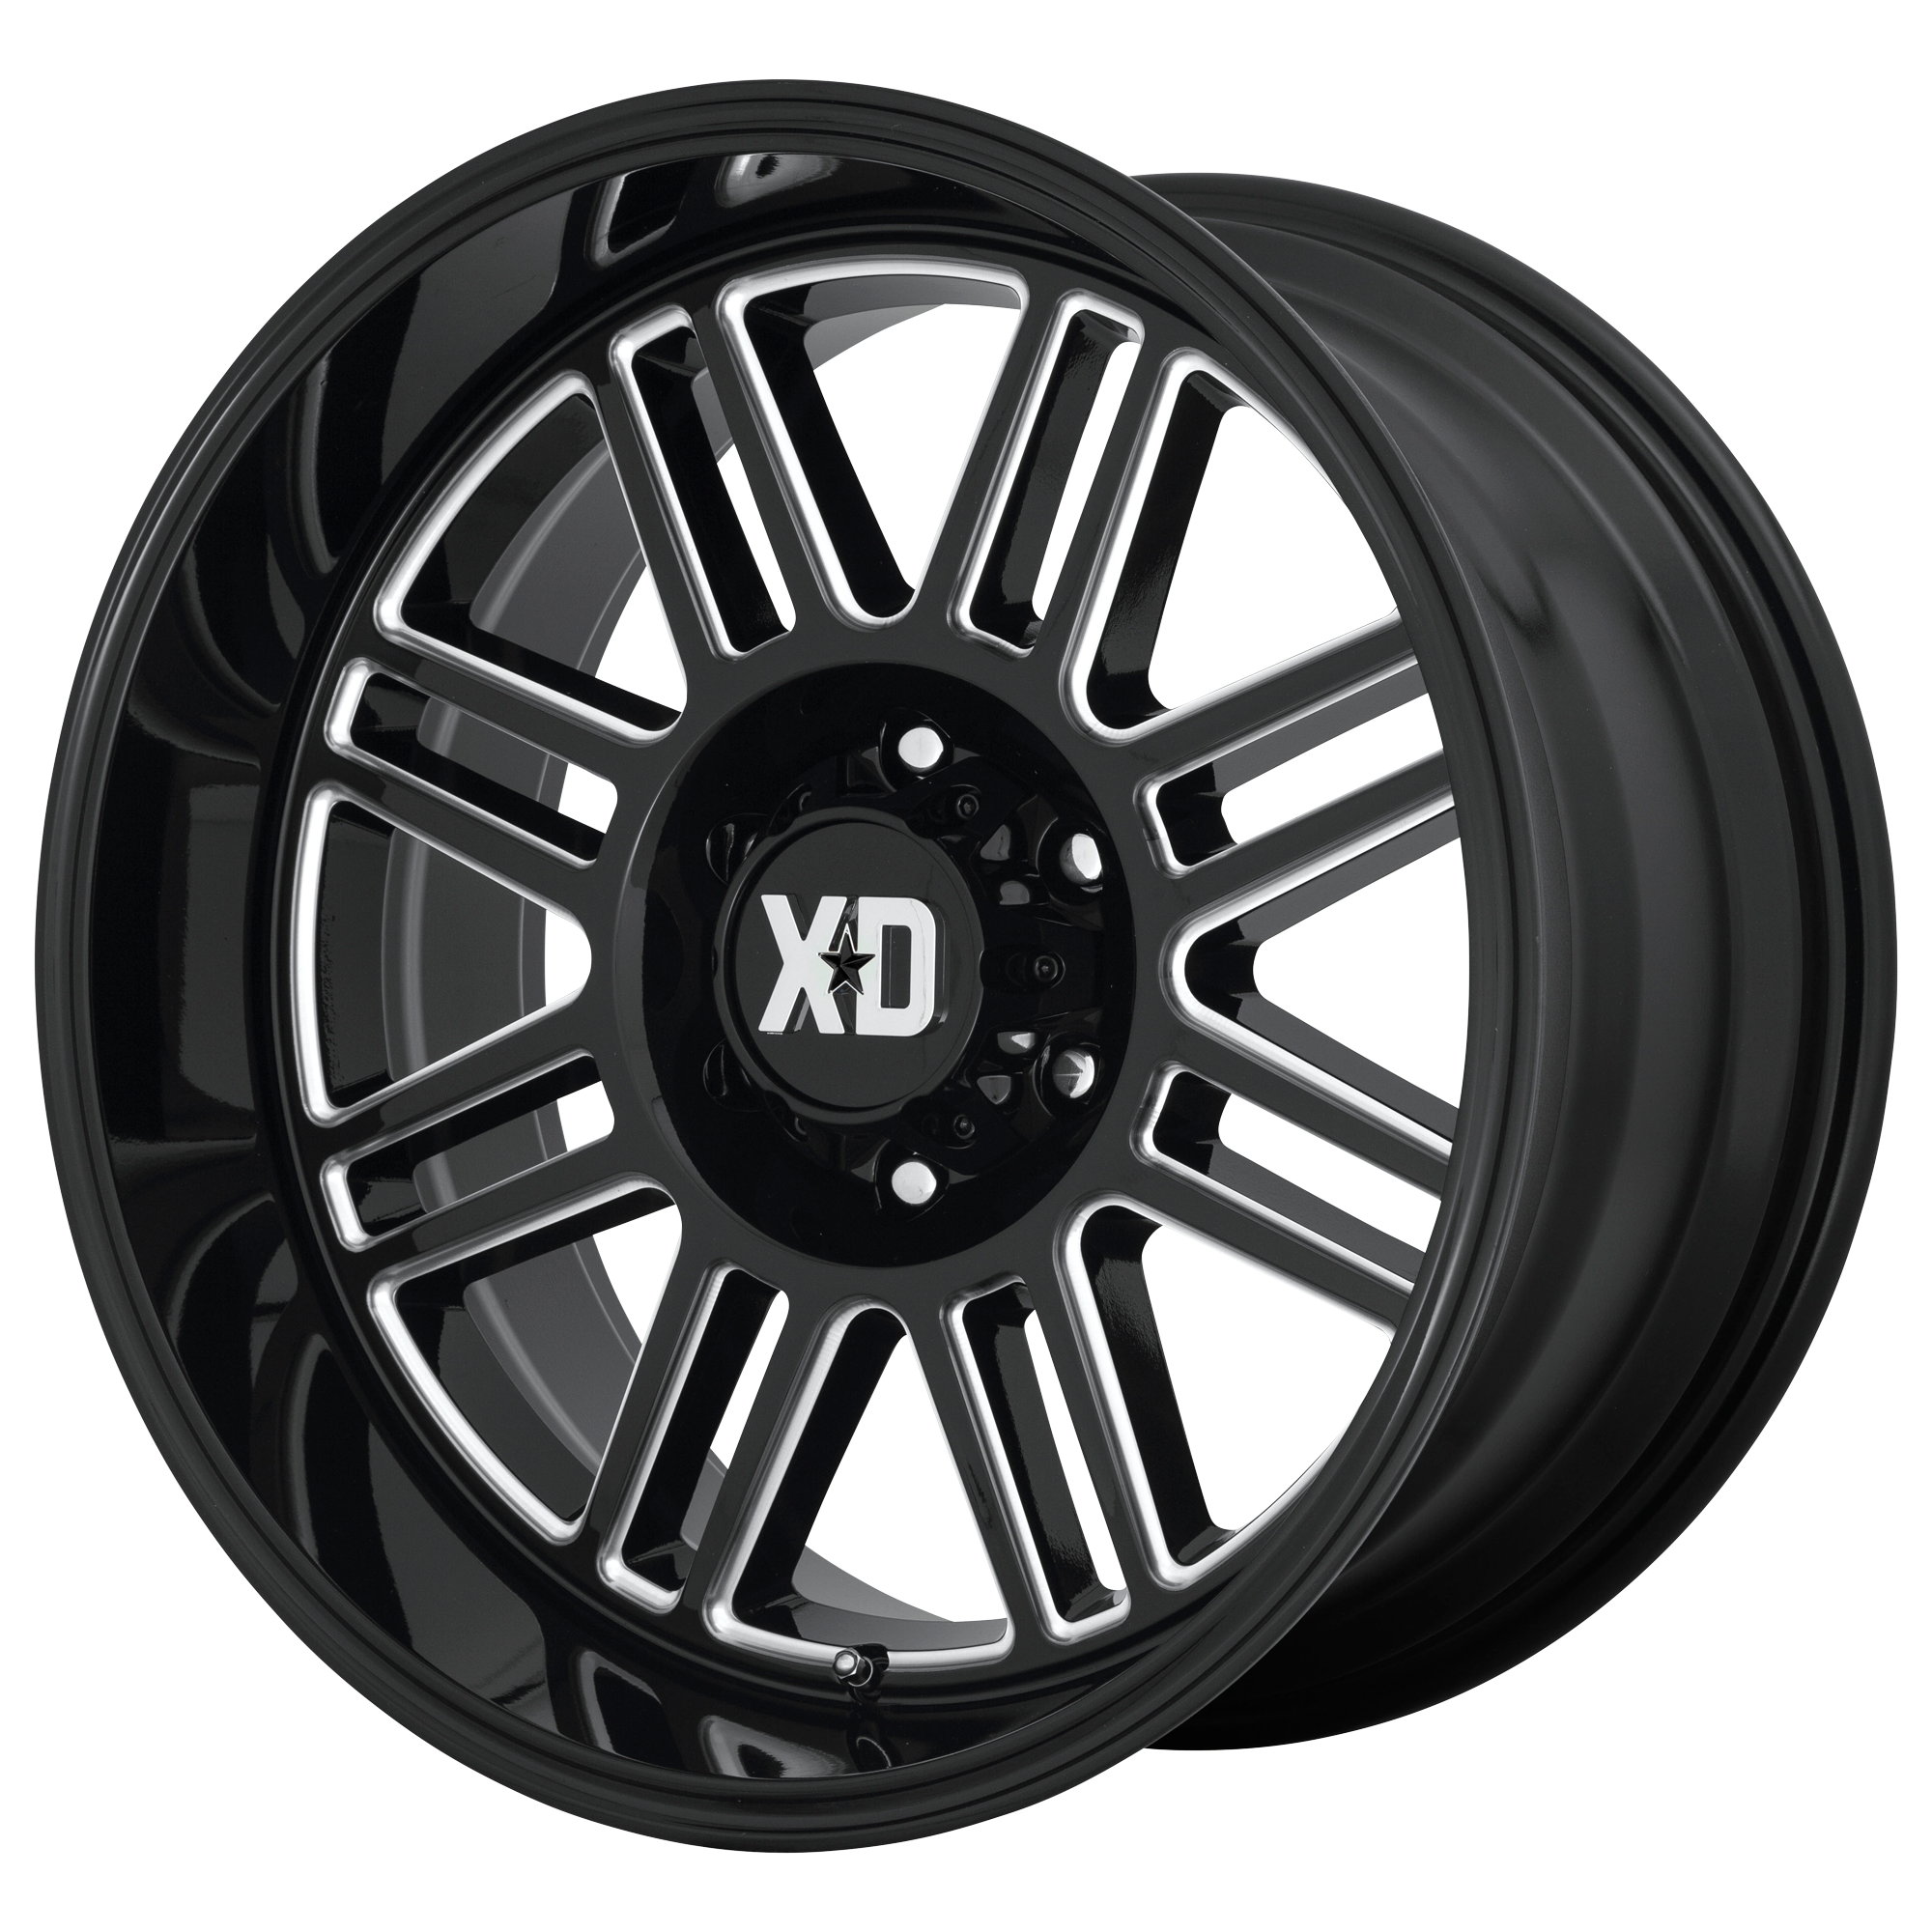 CAGE 20x9 5x127.00 GLOSS BLACK MILLED (18 mm) - Tires and Engine Performance